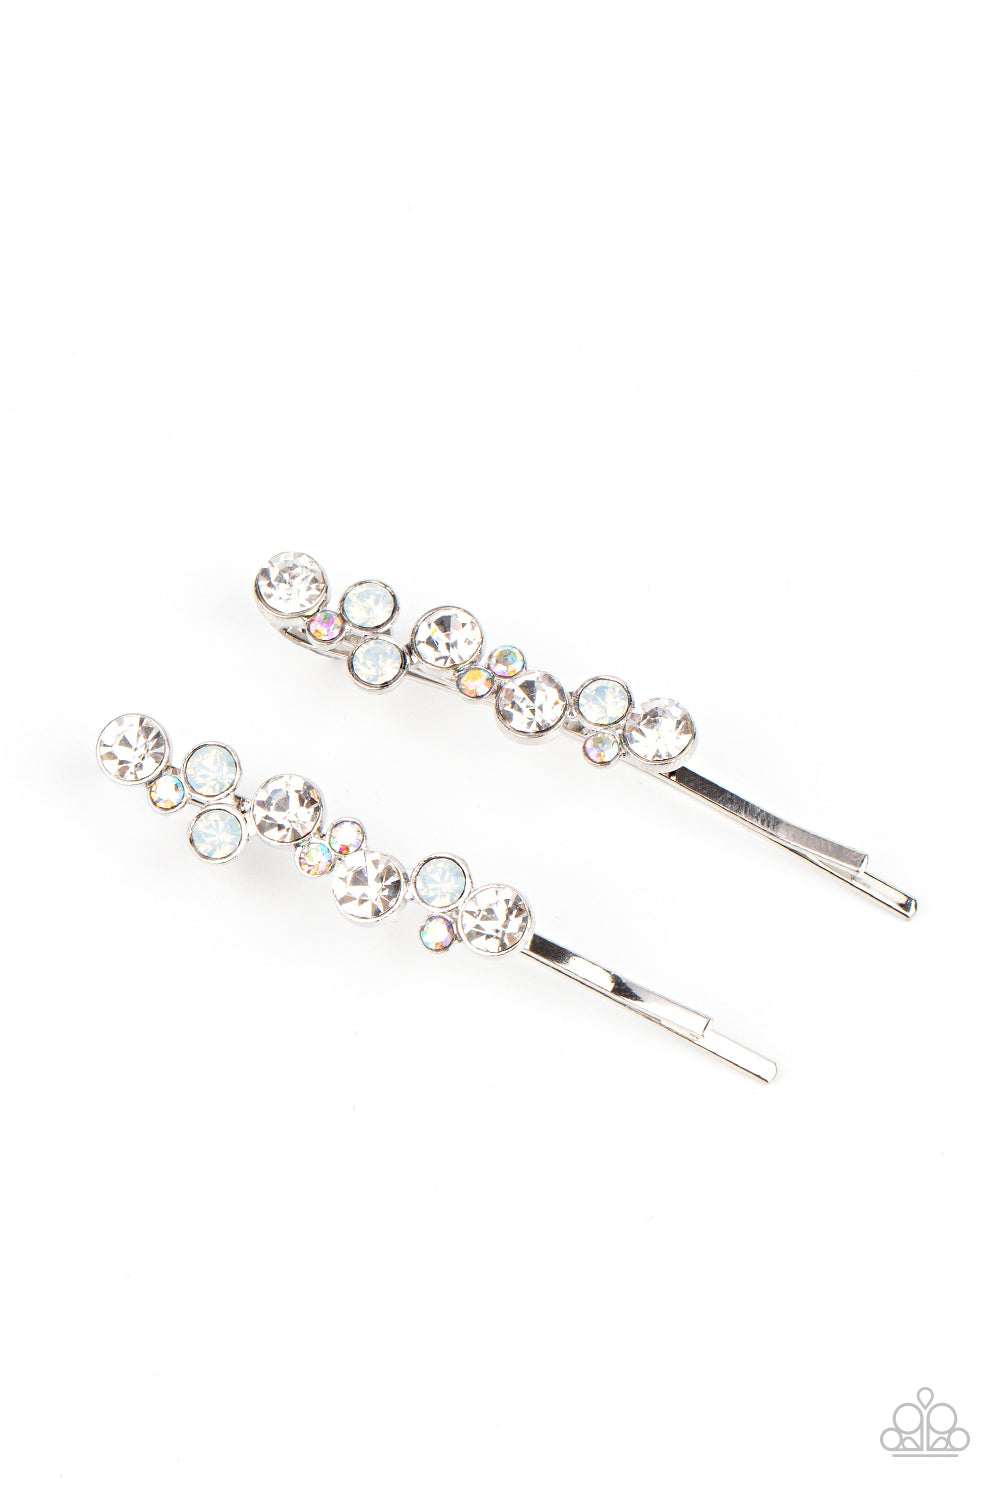 Bubbly Ballroom - White (Opal and Iridescent) Hair Clip